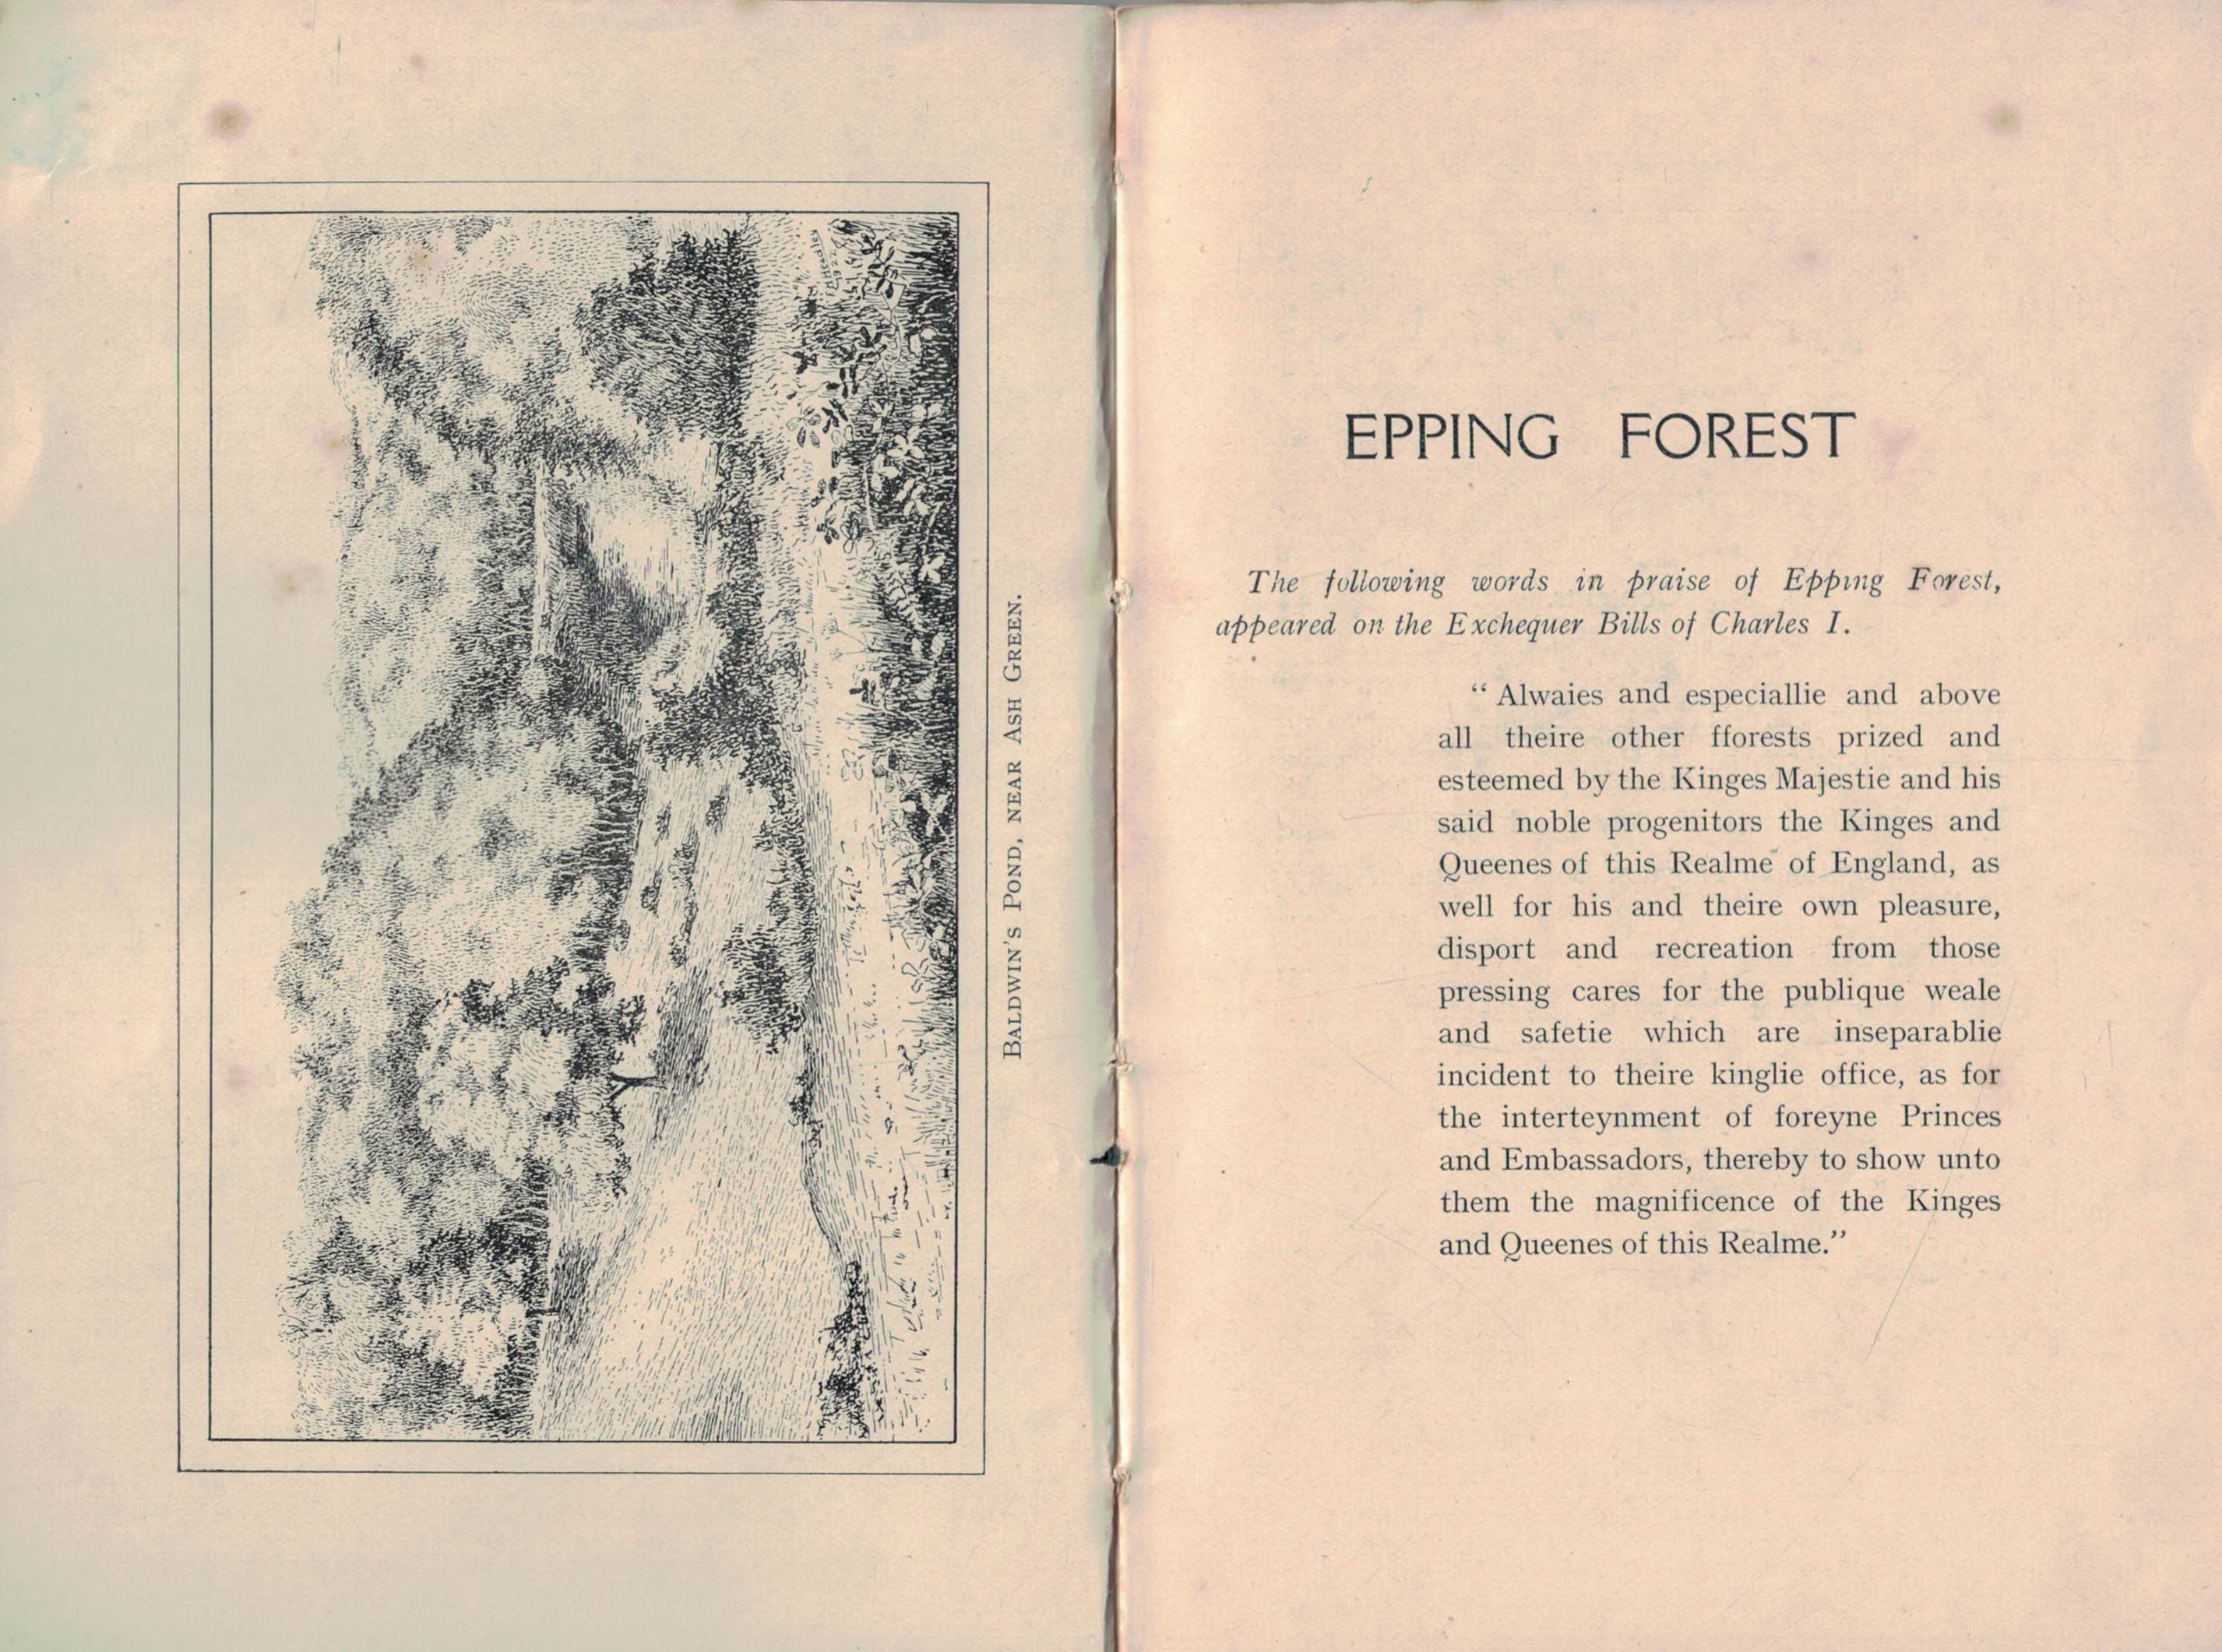 Epping Forest. Containing Notes on the Trees, Birds, and Flowers, etc.